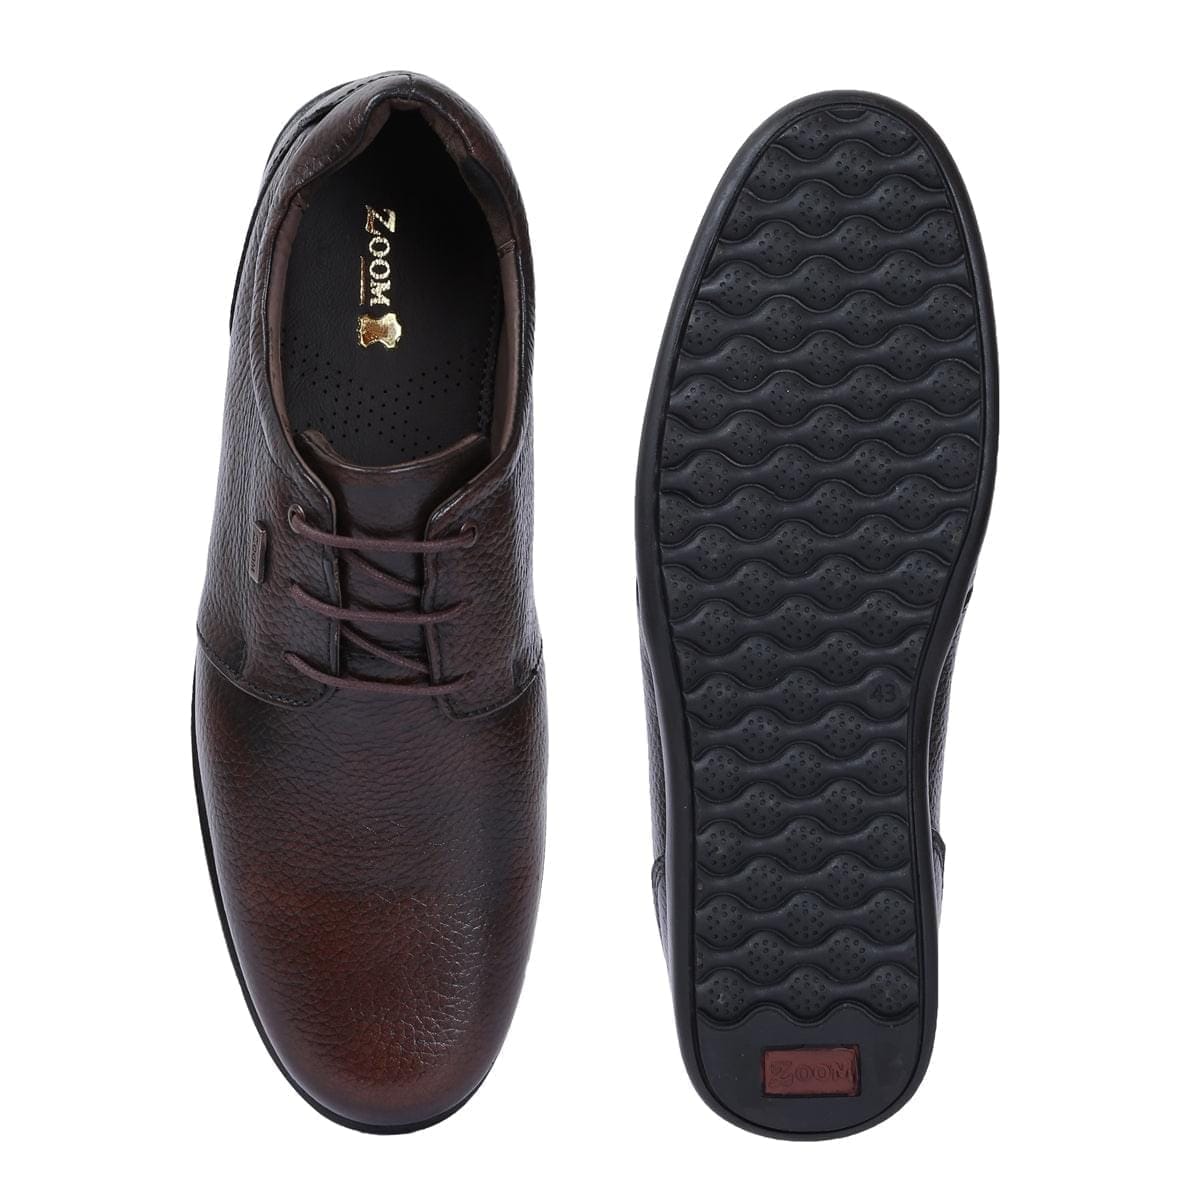 Lace Up Shoes for Men NH-77_brown1